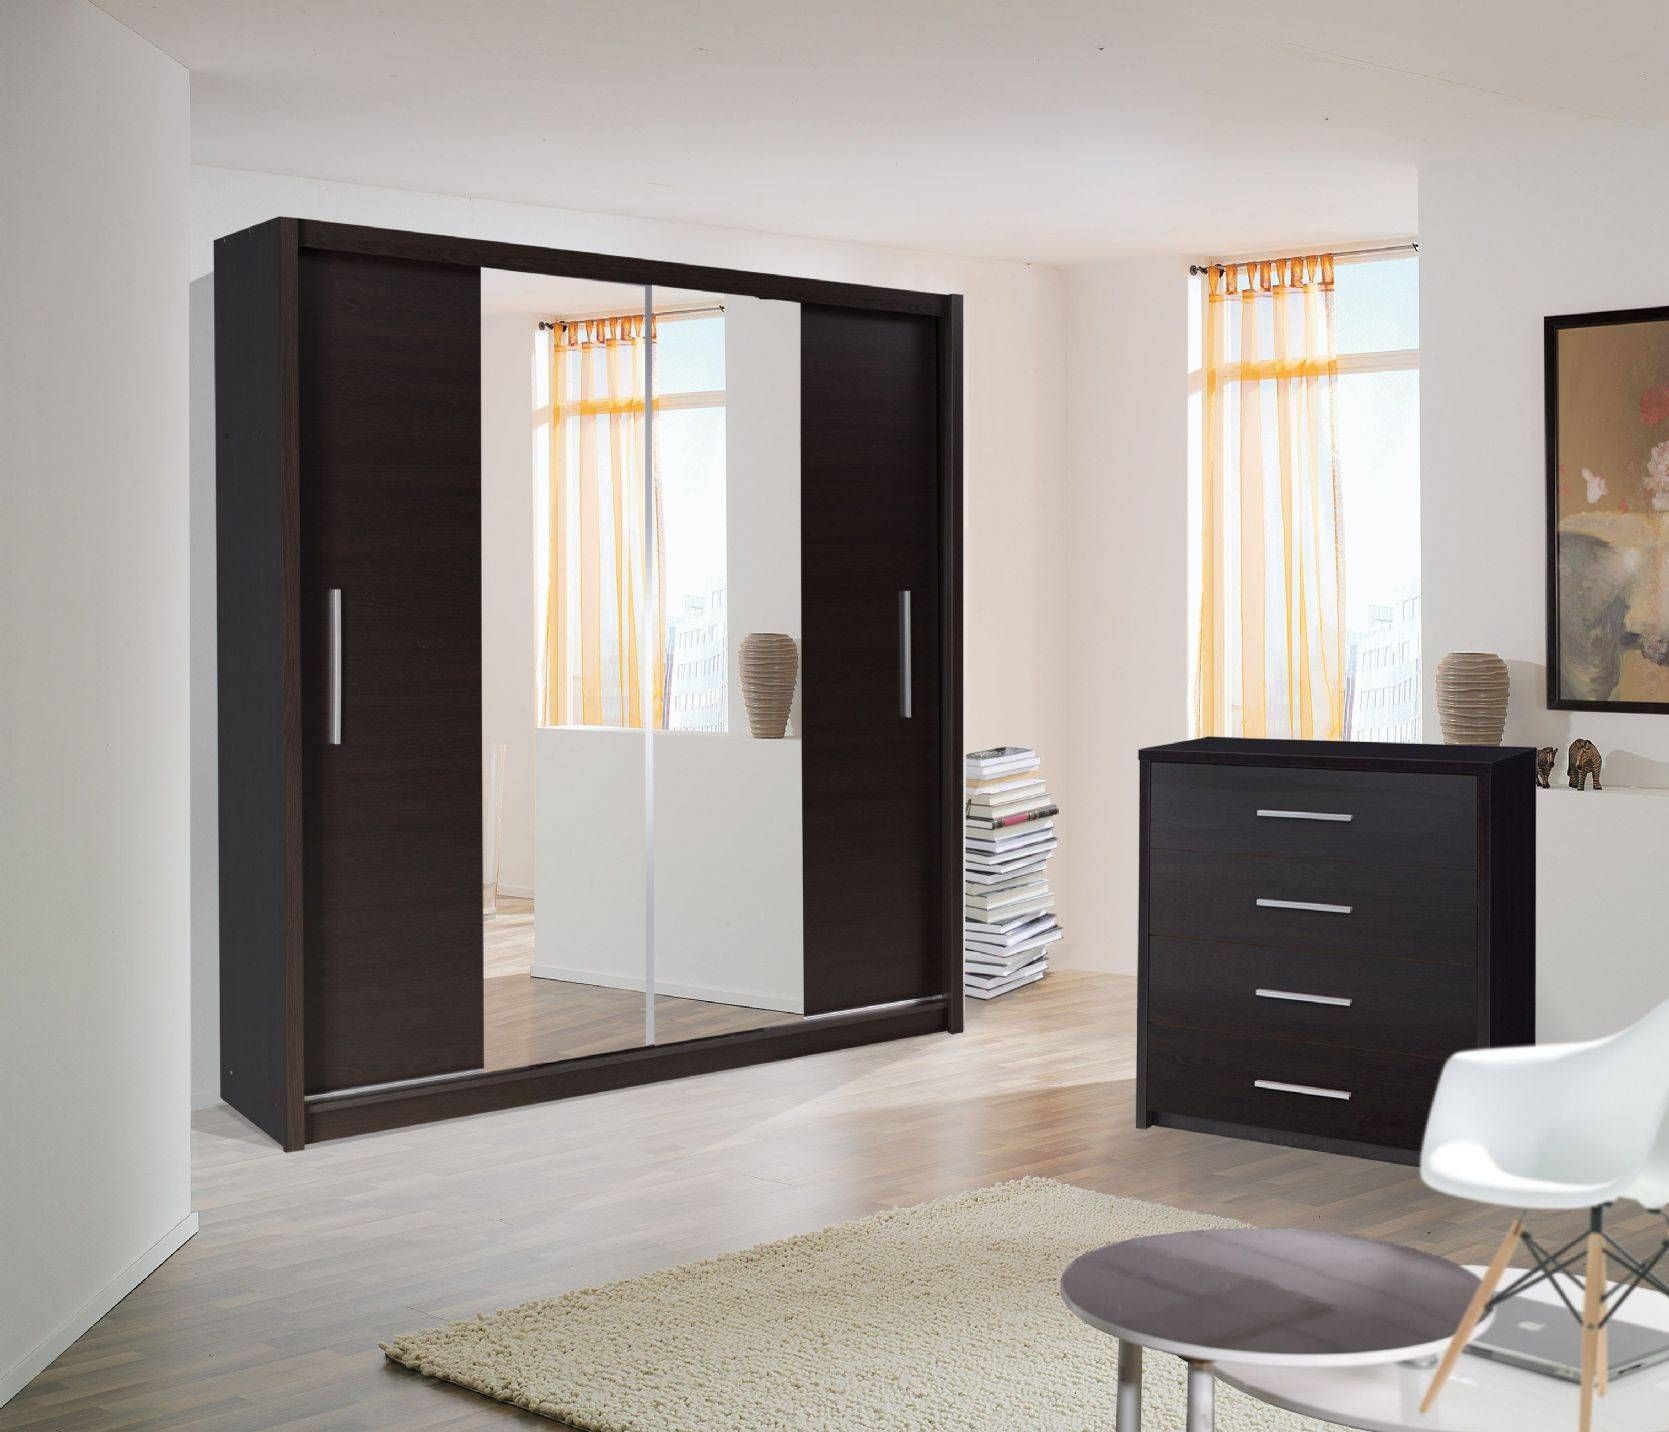 Bedroom Furniture : Bedroom Armoire Small Armoire Mirror Door Intended For Single Wardrobes With Mirror (View 13 of 15)